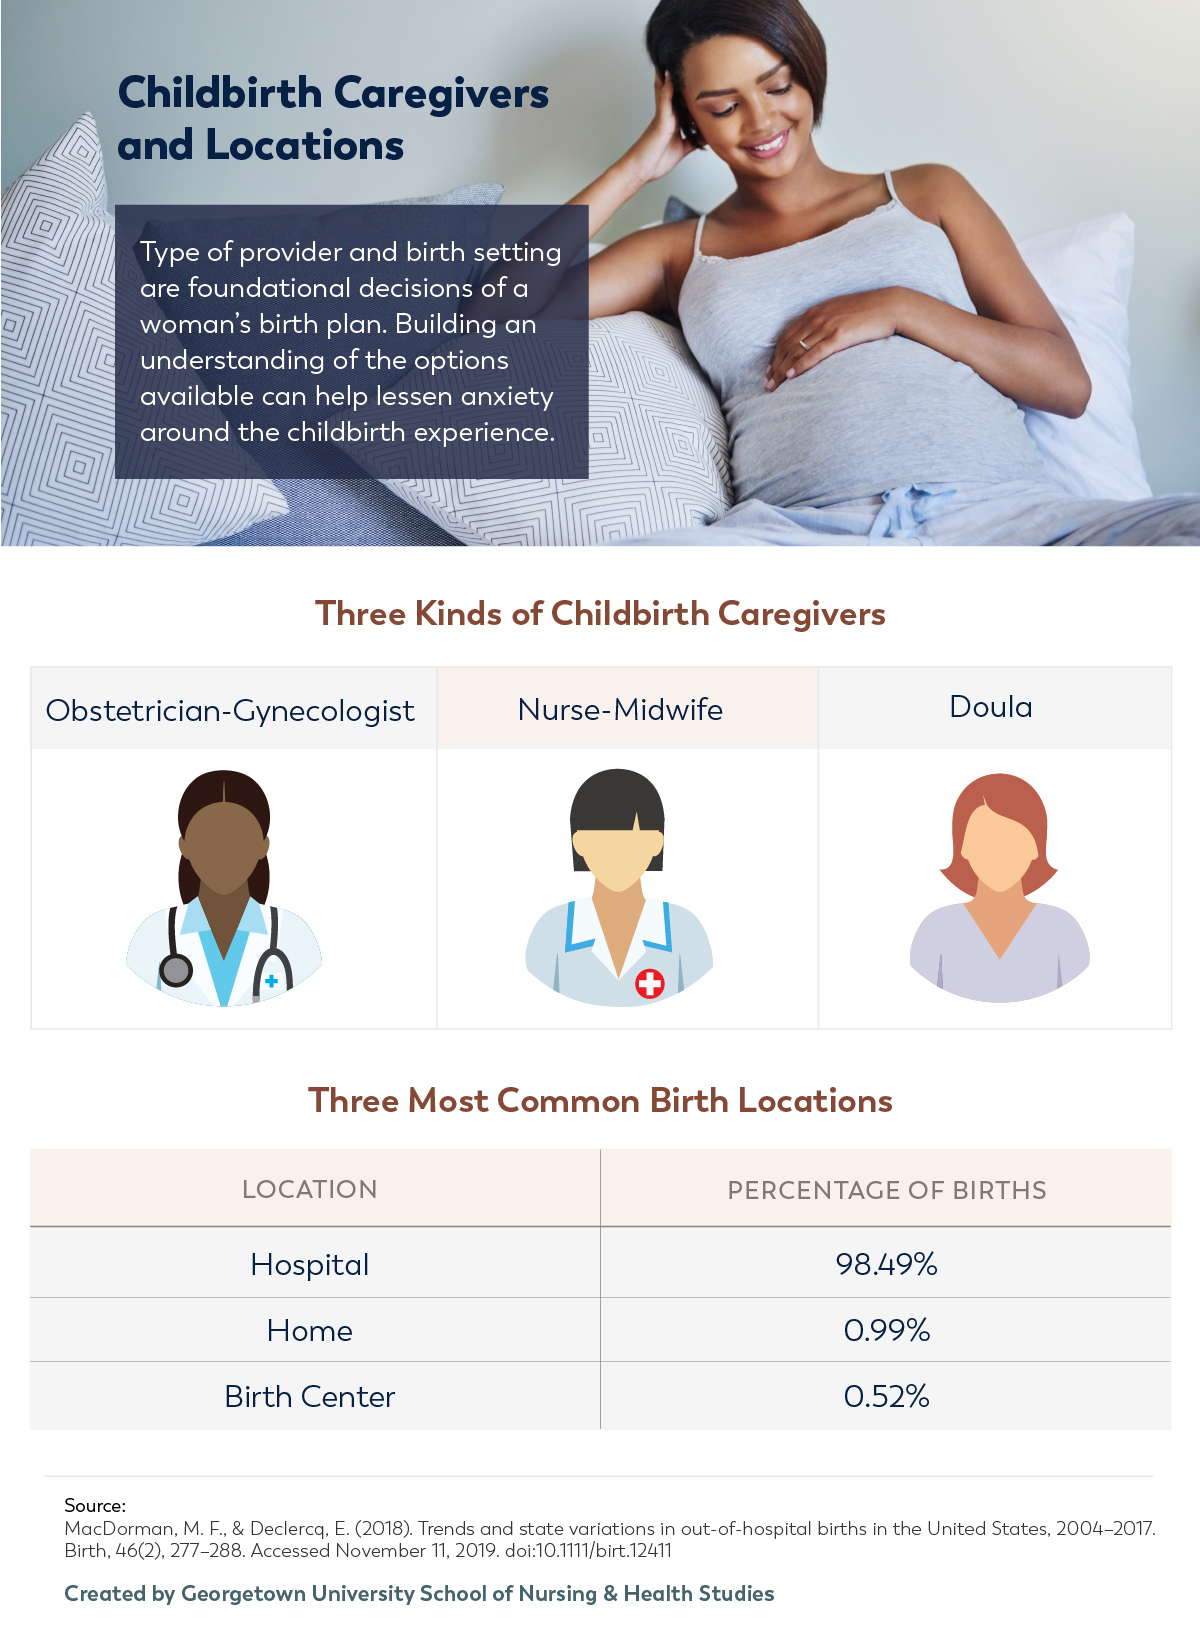 Childbirth care providers and locations.